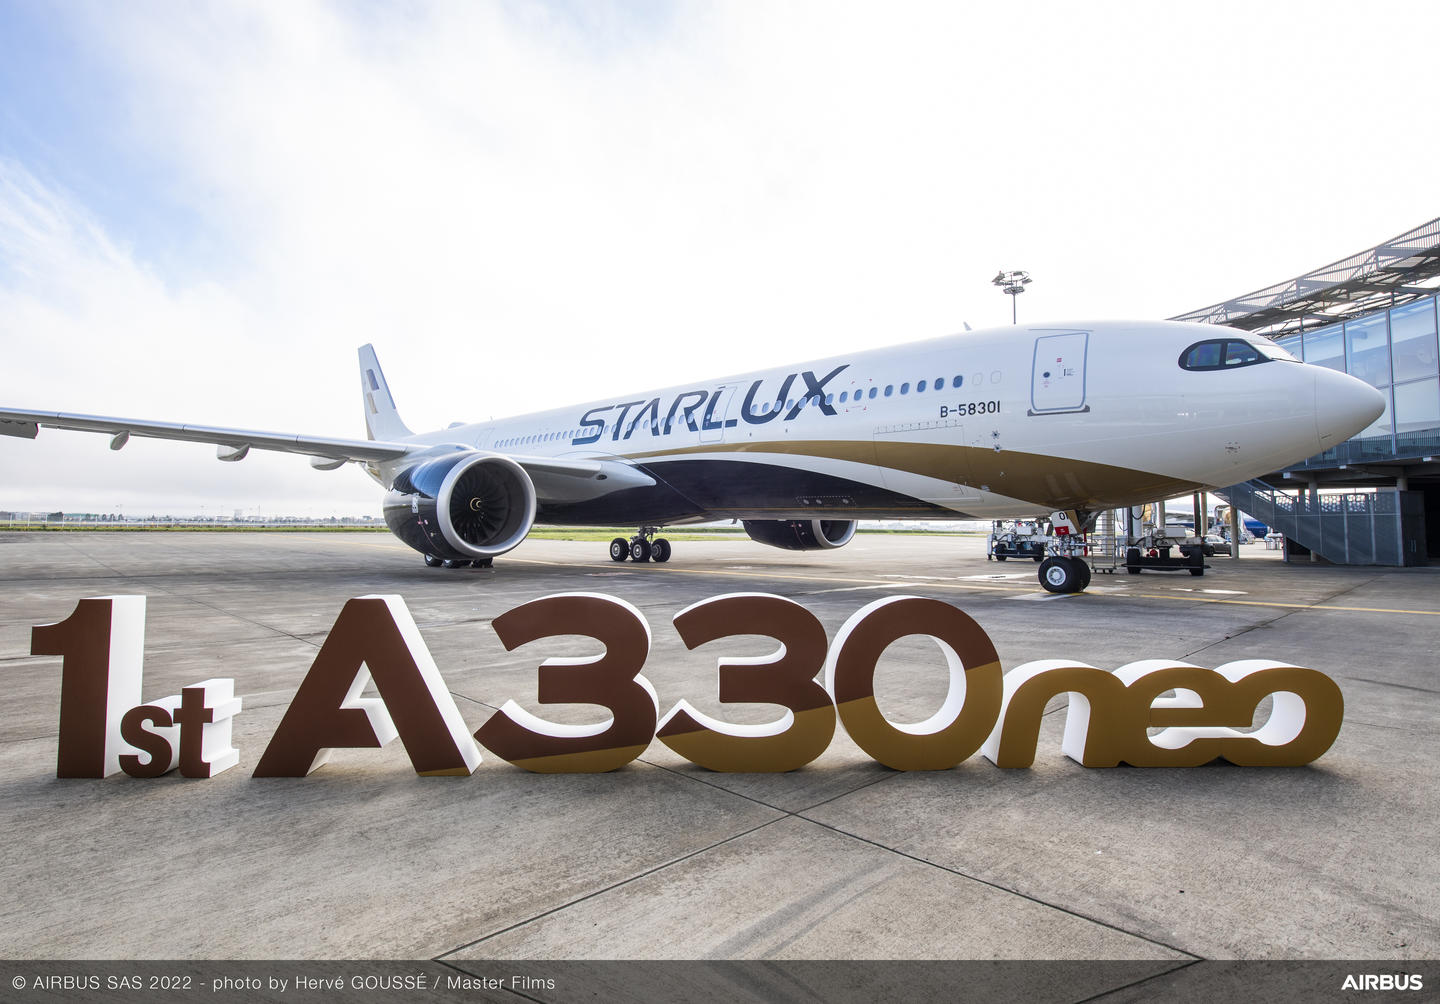 STARLUX launches widebody fleet with first A330neo | News | Airbus Aircraft